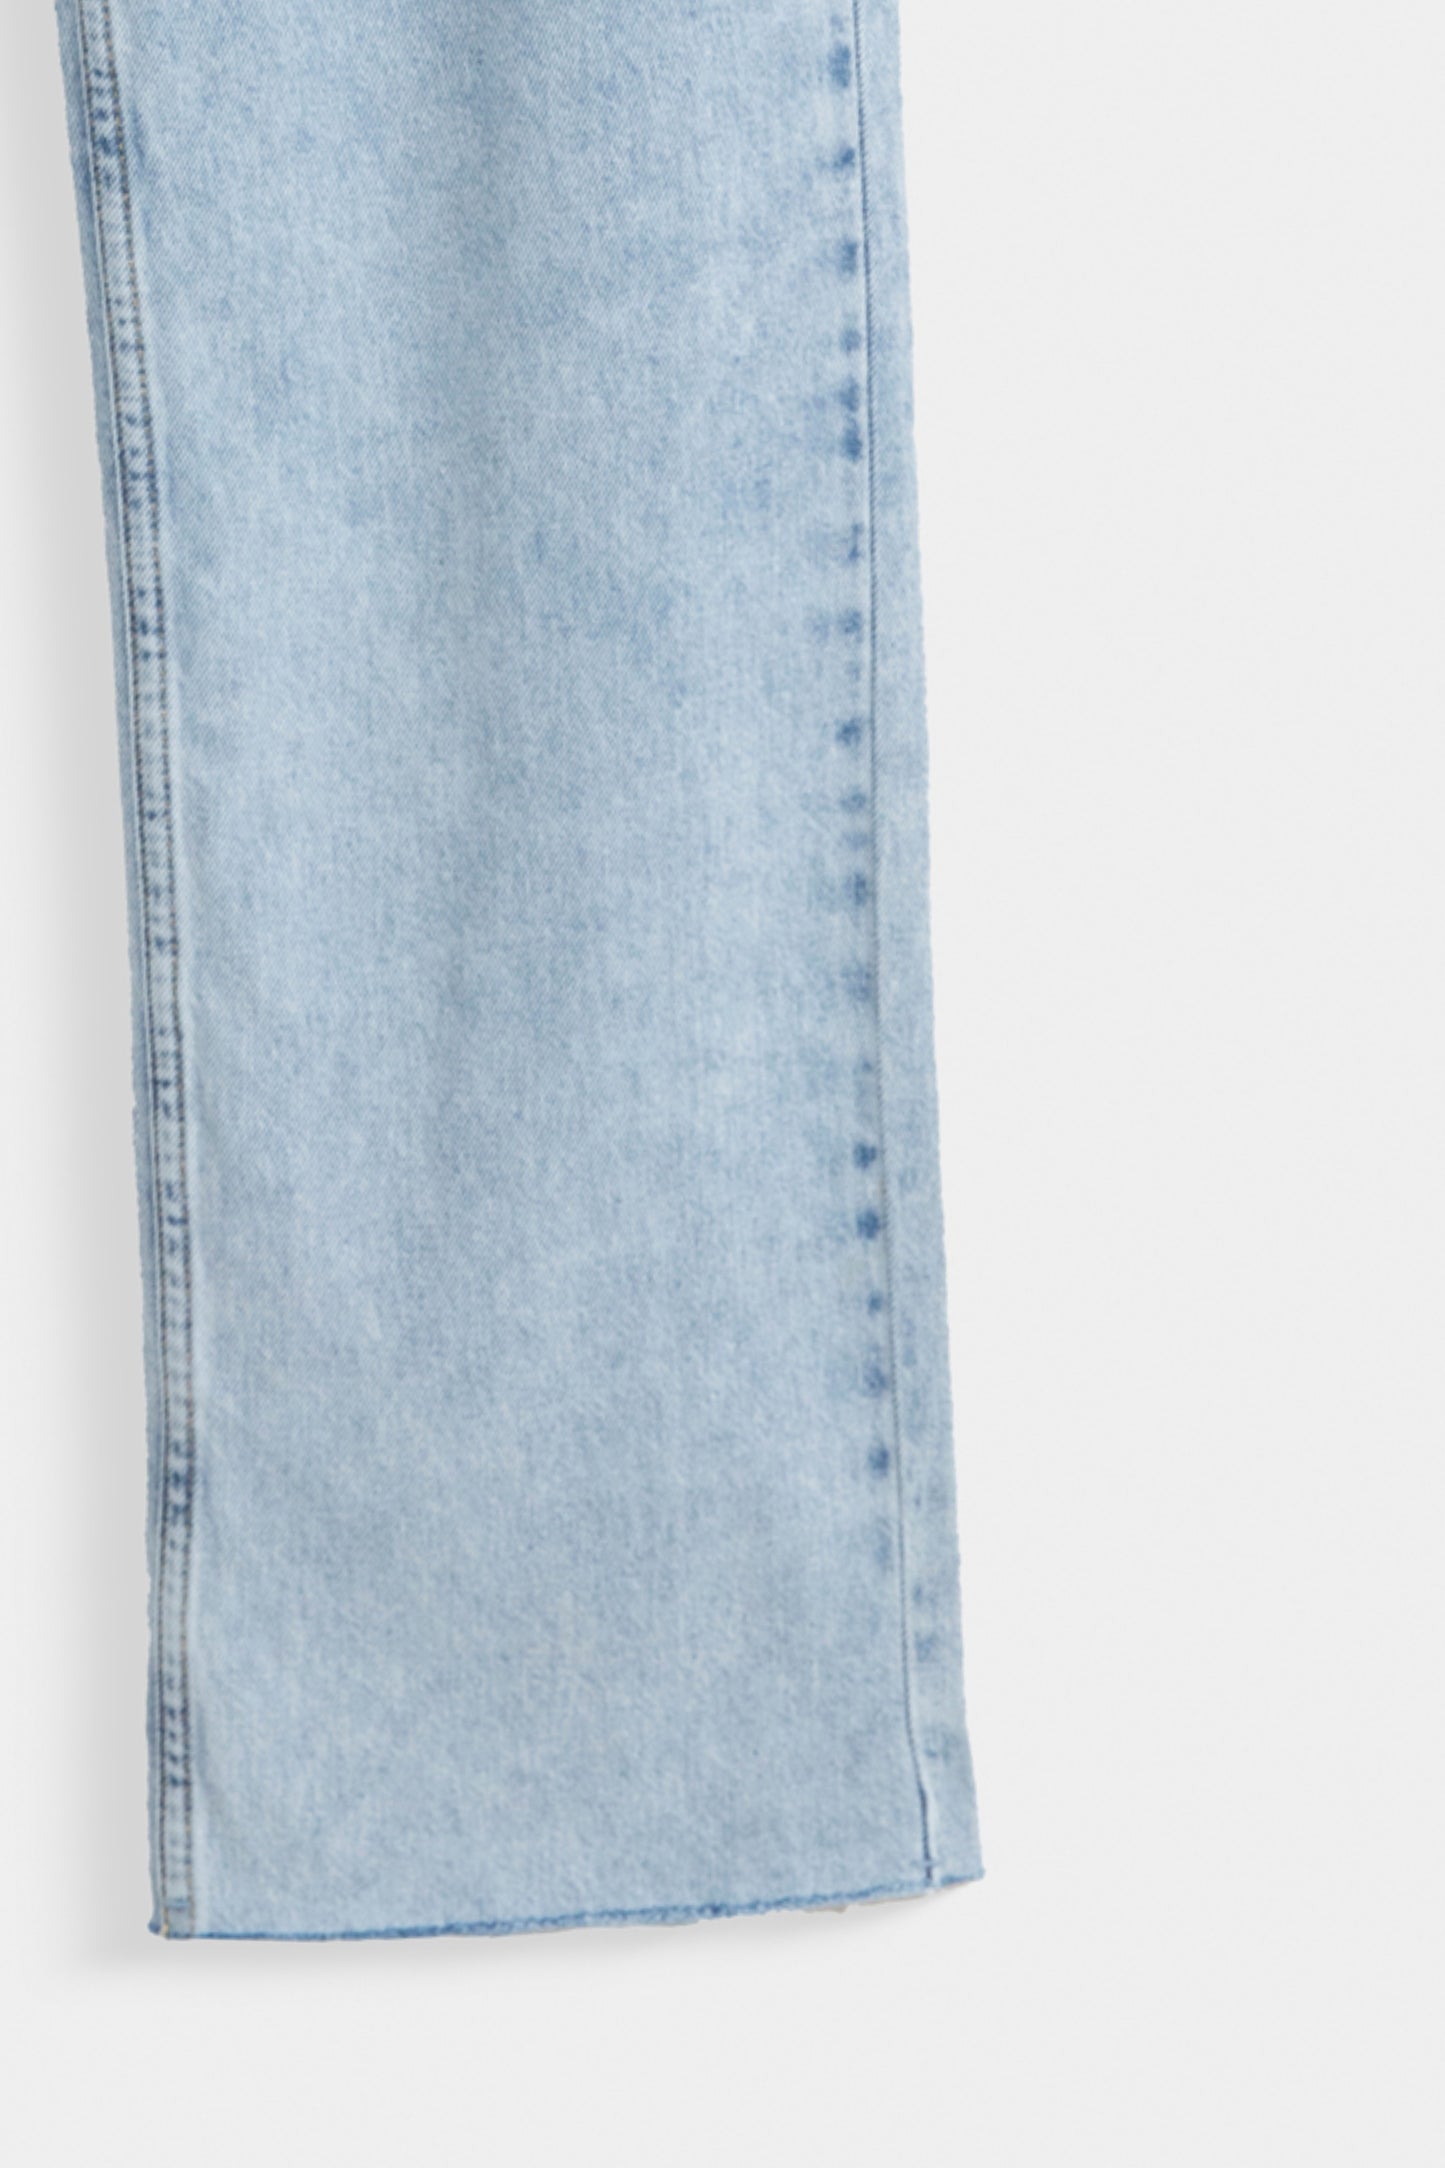 Straight Fit Jeans With Distressed Hem